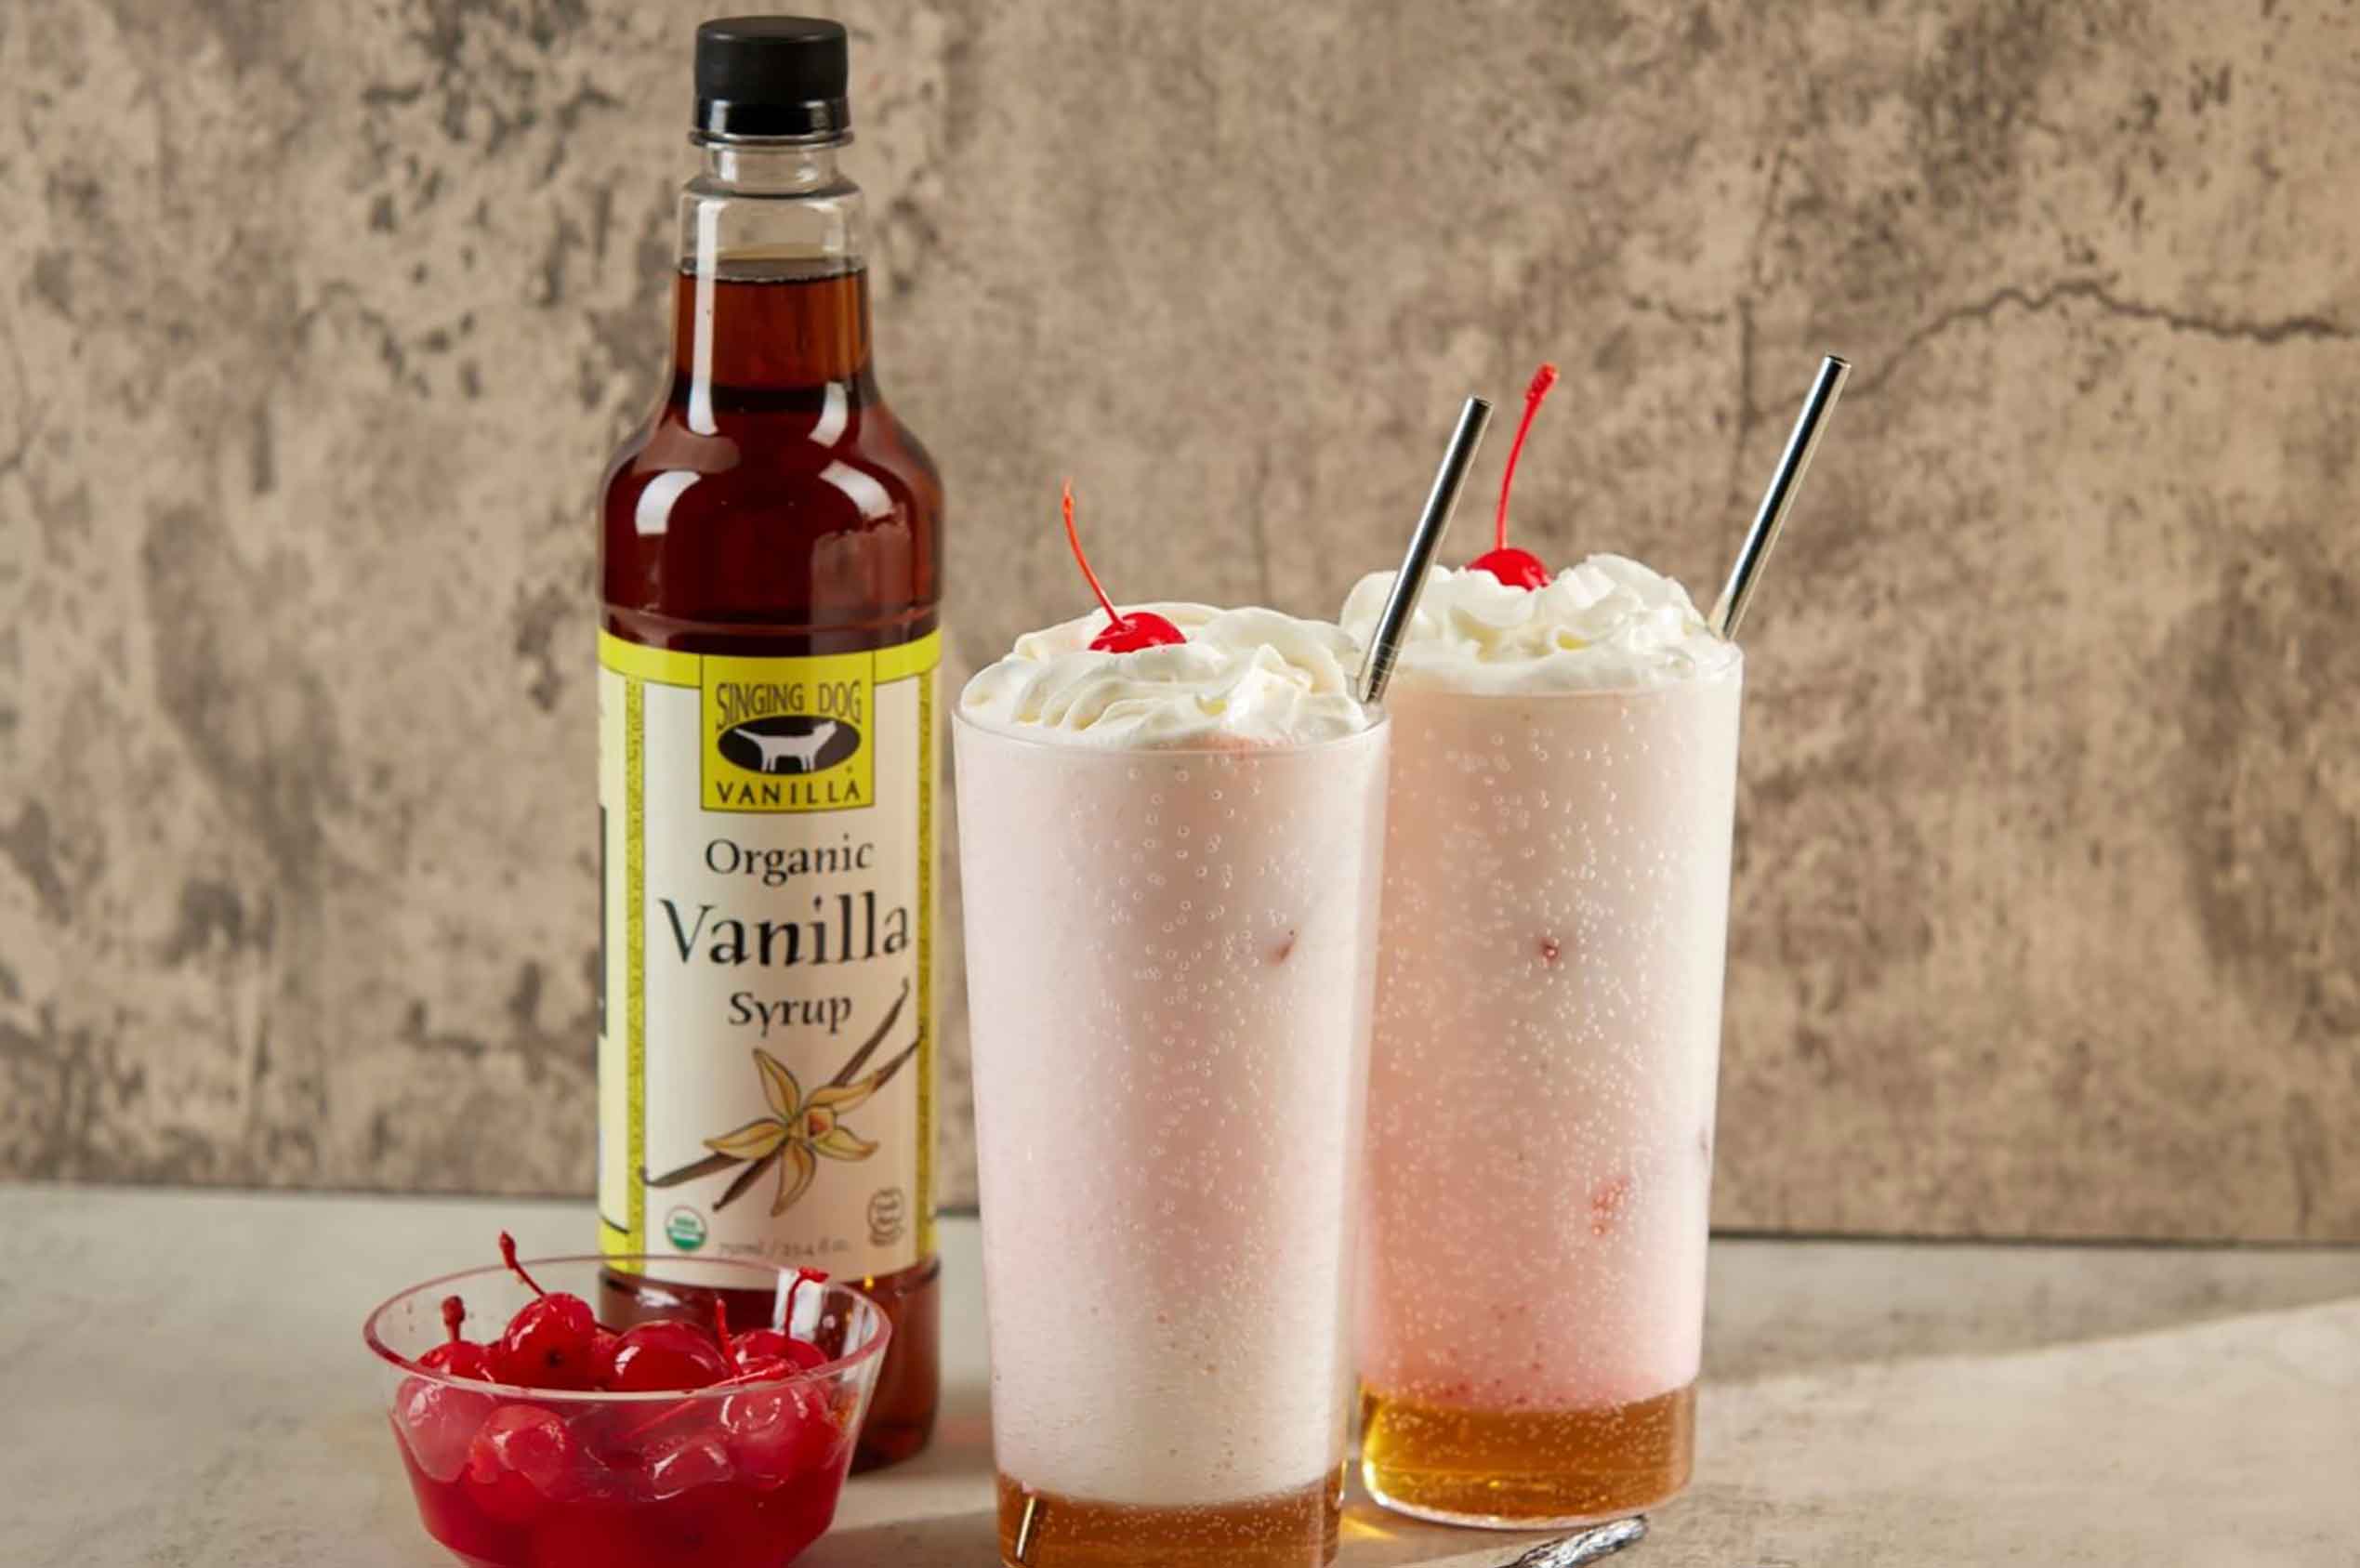 Singing Dog Vanilla’s newest product, Organic Vanilla Syrup, opens a wide range of beverage and baking options for vanilla enthusiasts